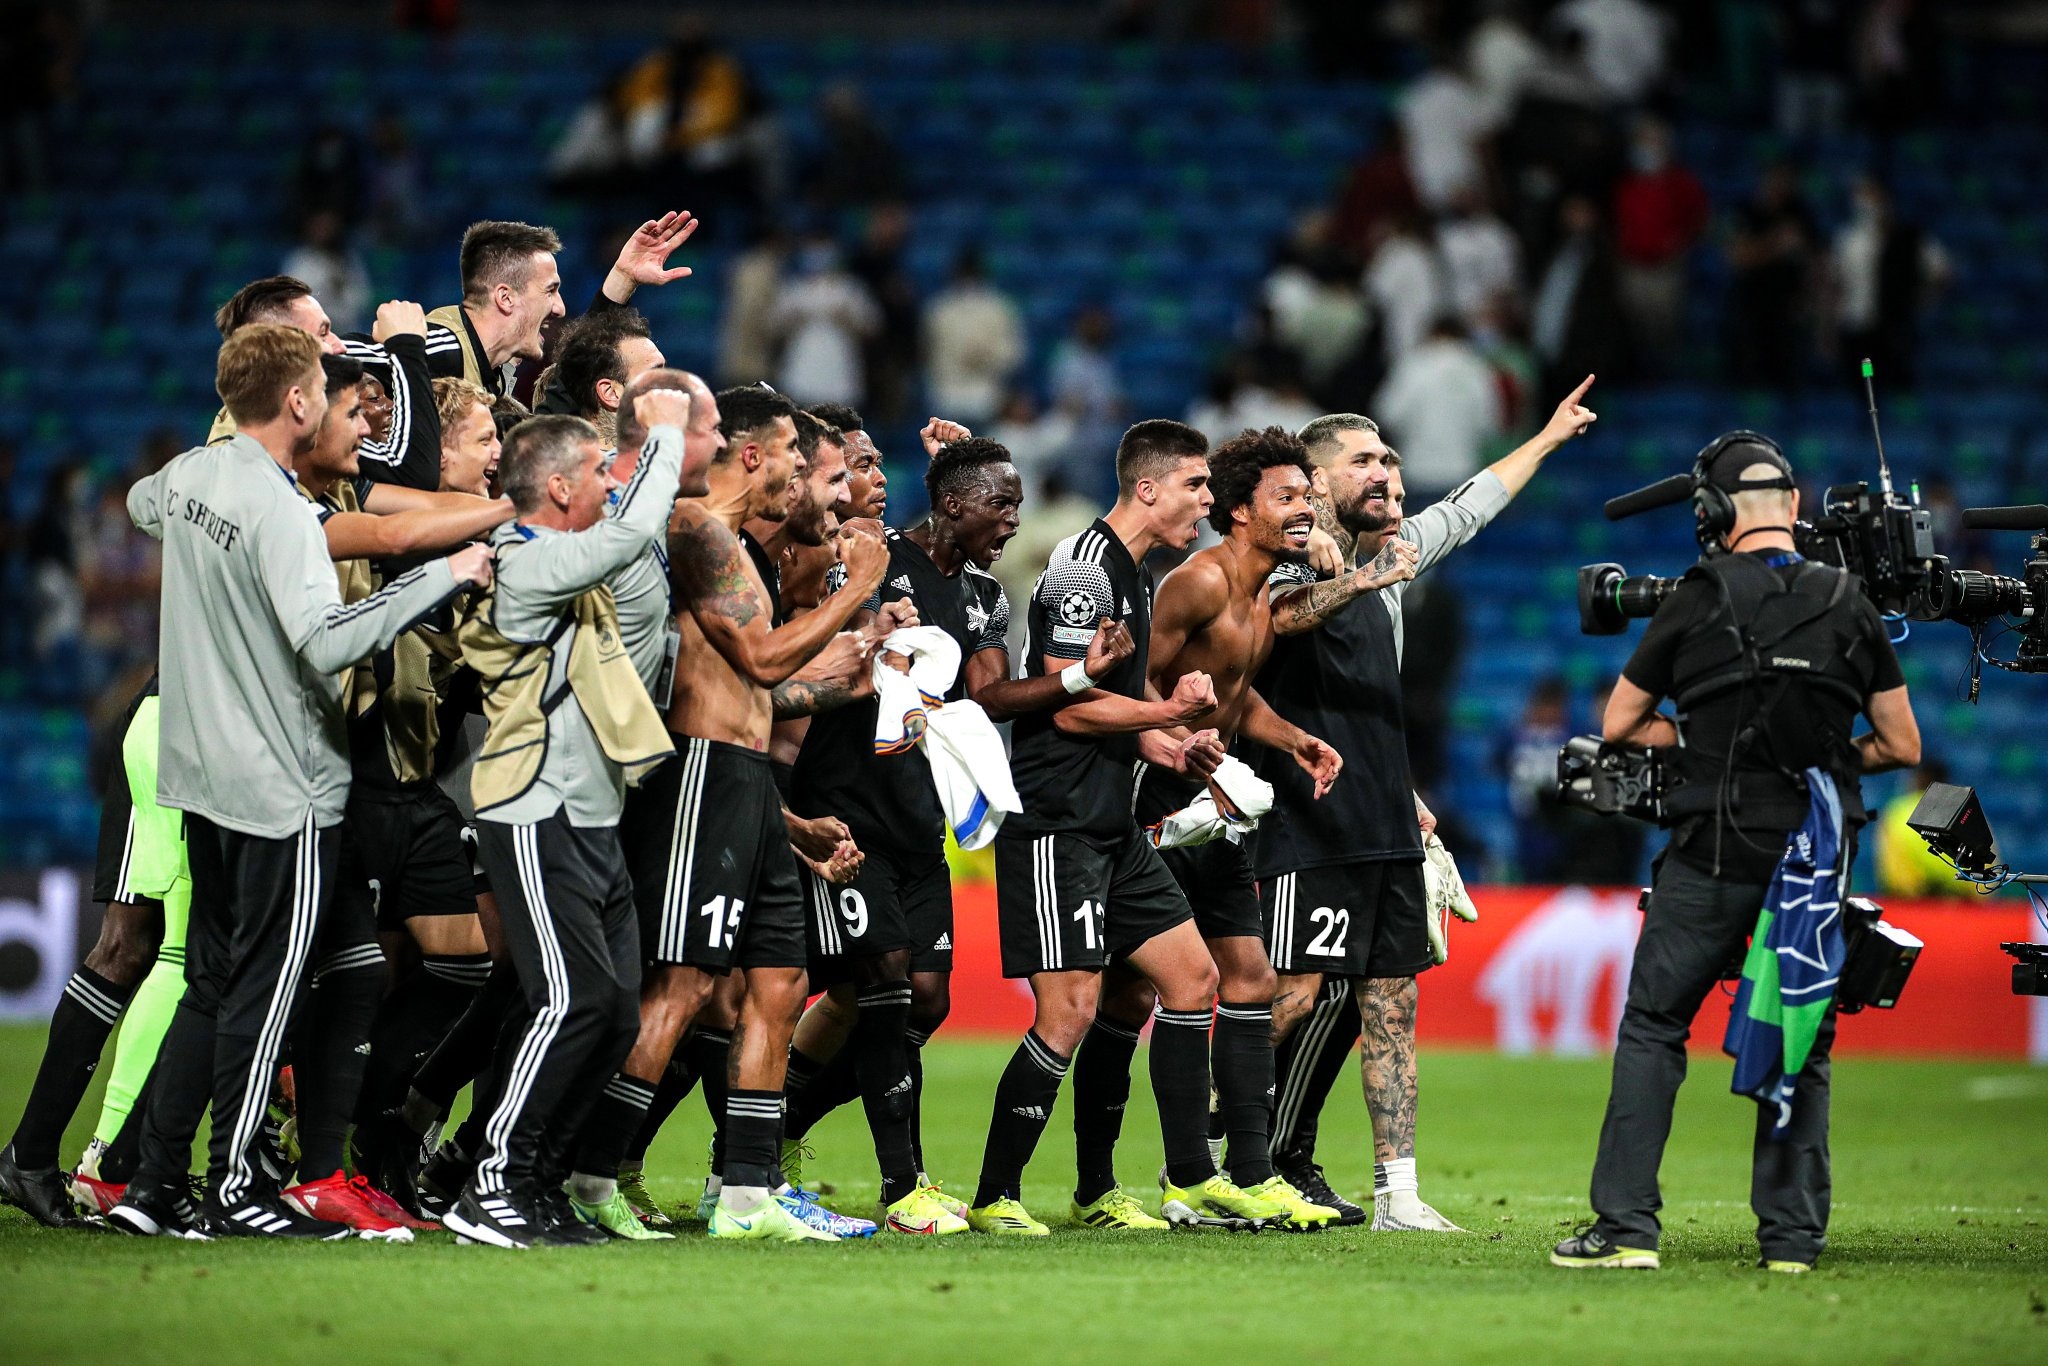 Sheriff Tiraspol's players celebrate after defeating Real Madrid in the Champions League